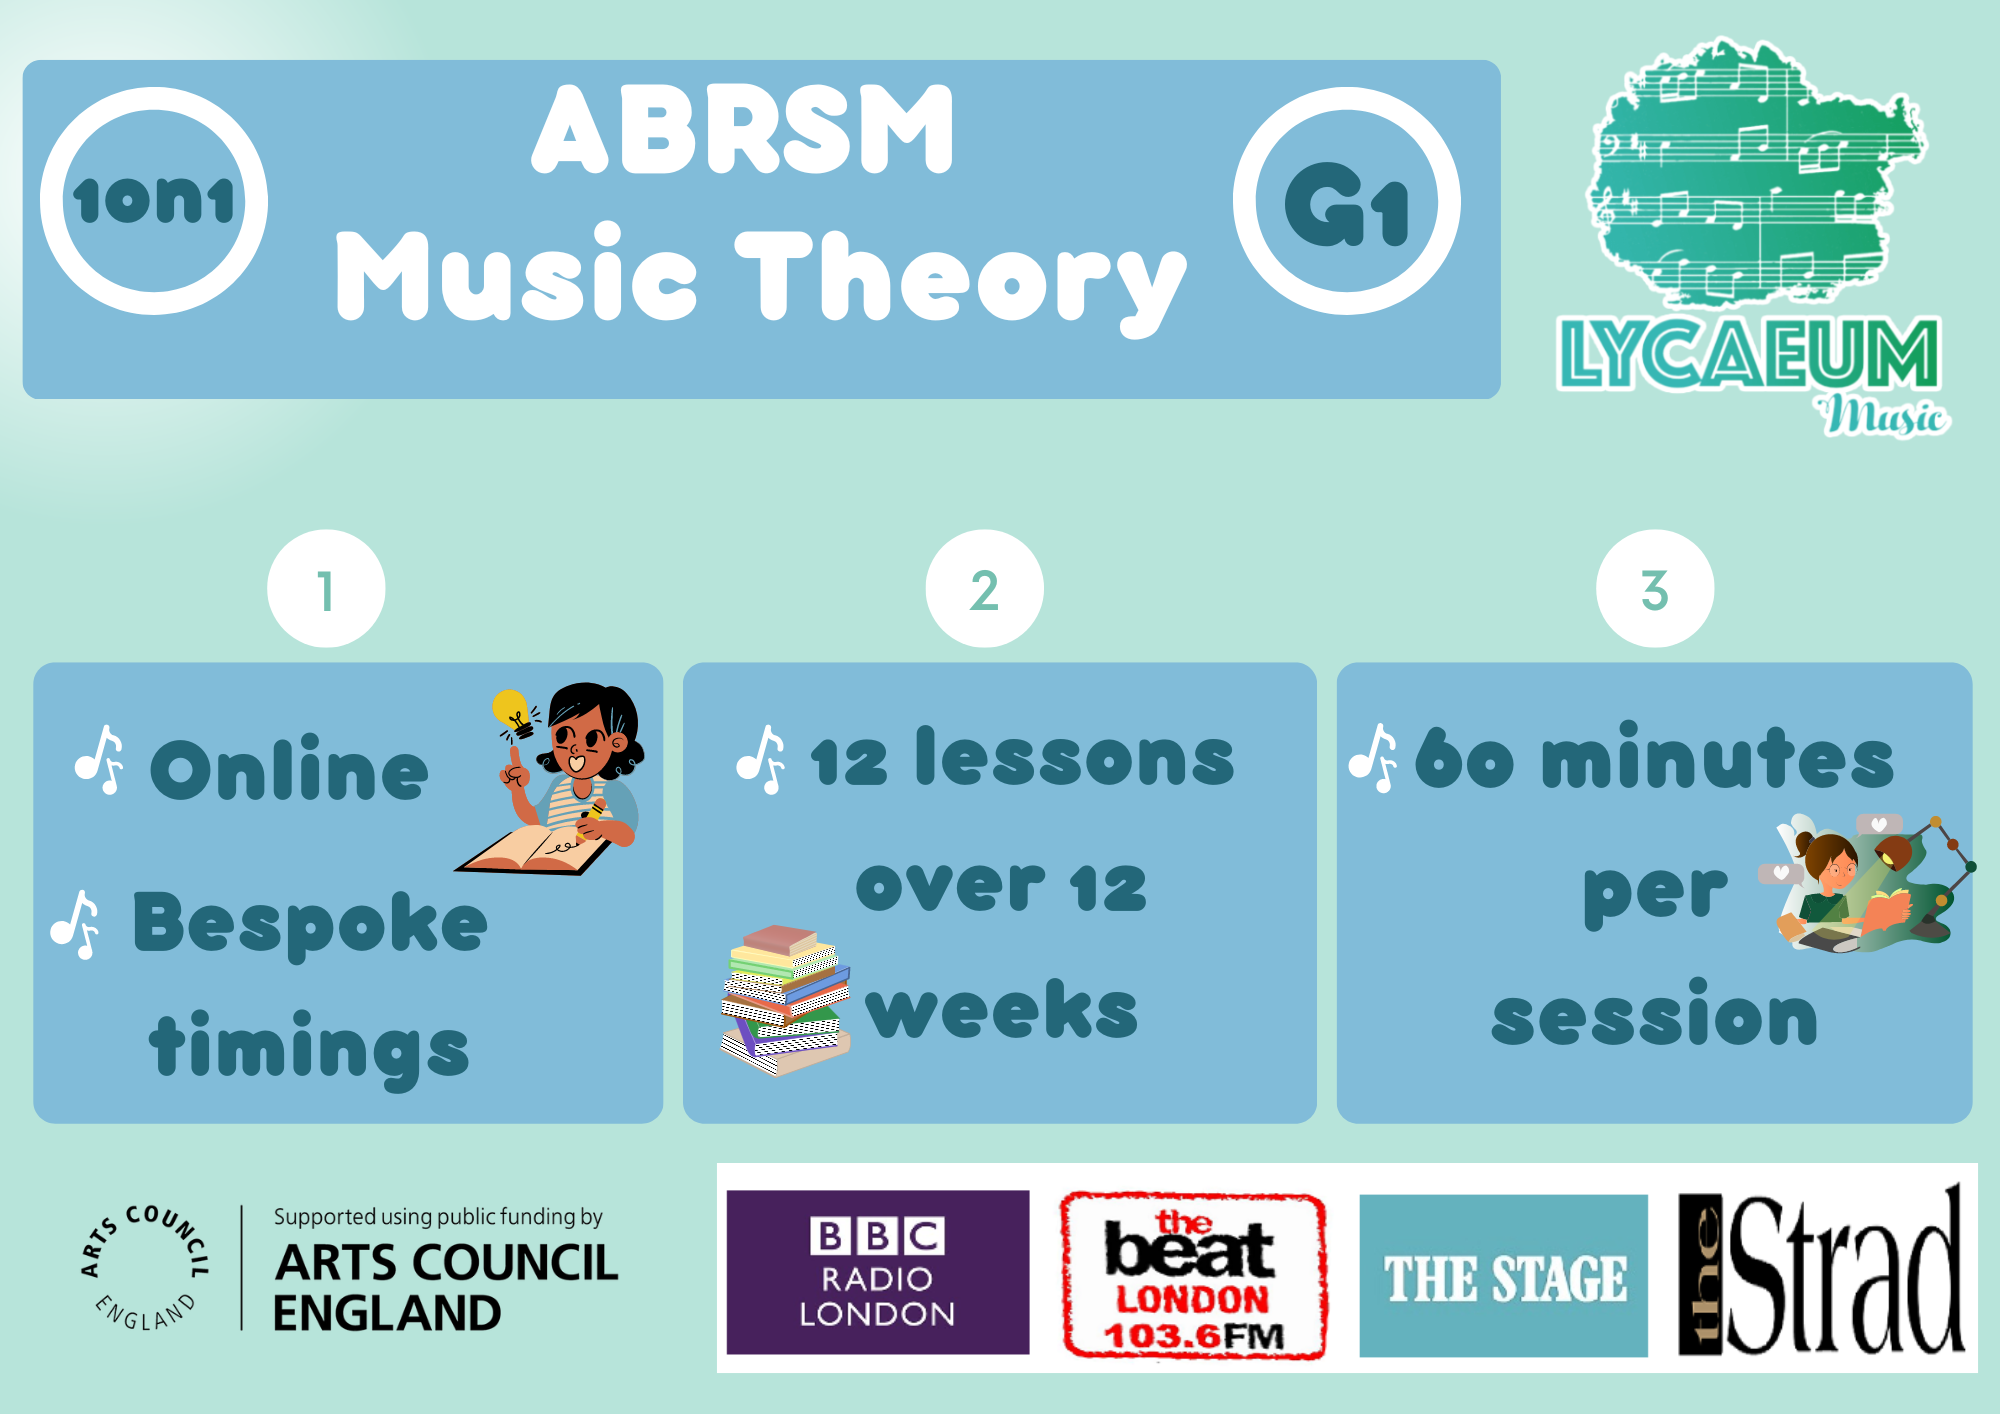 1on1 abrsm music theory: grade 1 – bespoke timings to suit your schedule